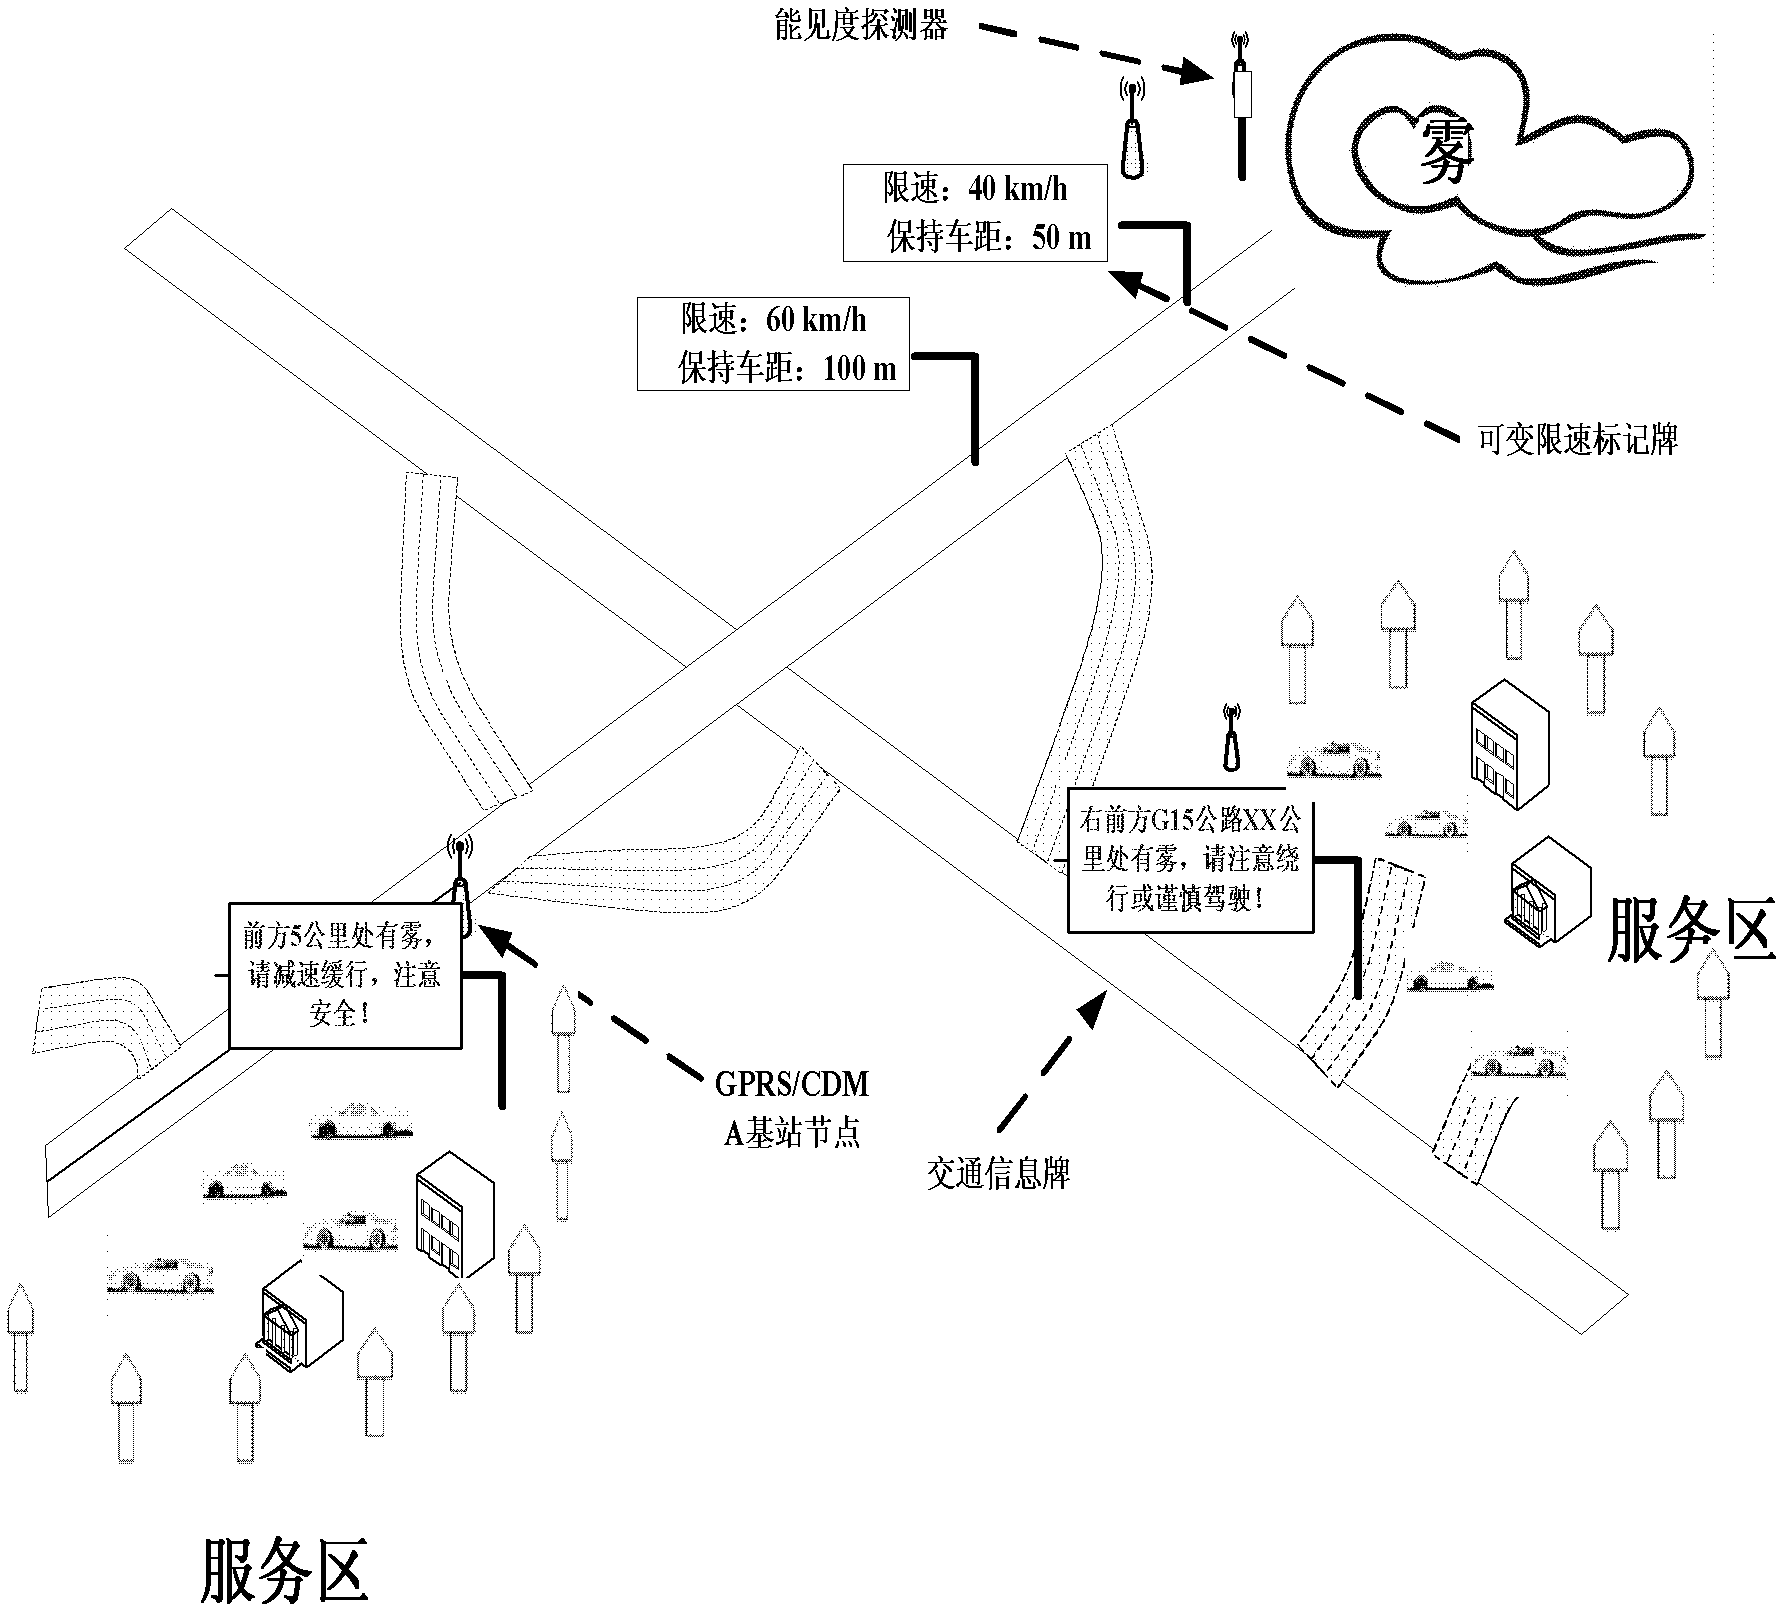 Highway intelligent aided guidance system based on GPRS (General Packet Radio Service)/CDMA (Code Division Multiple Access) wireless network and control method thereof